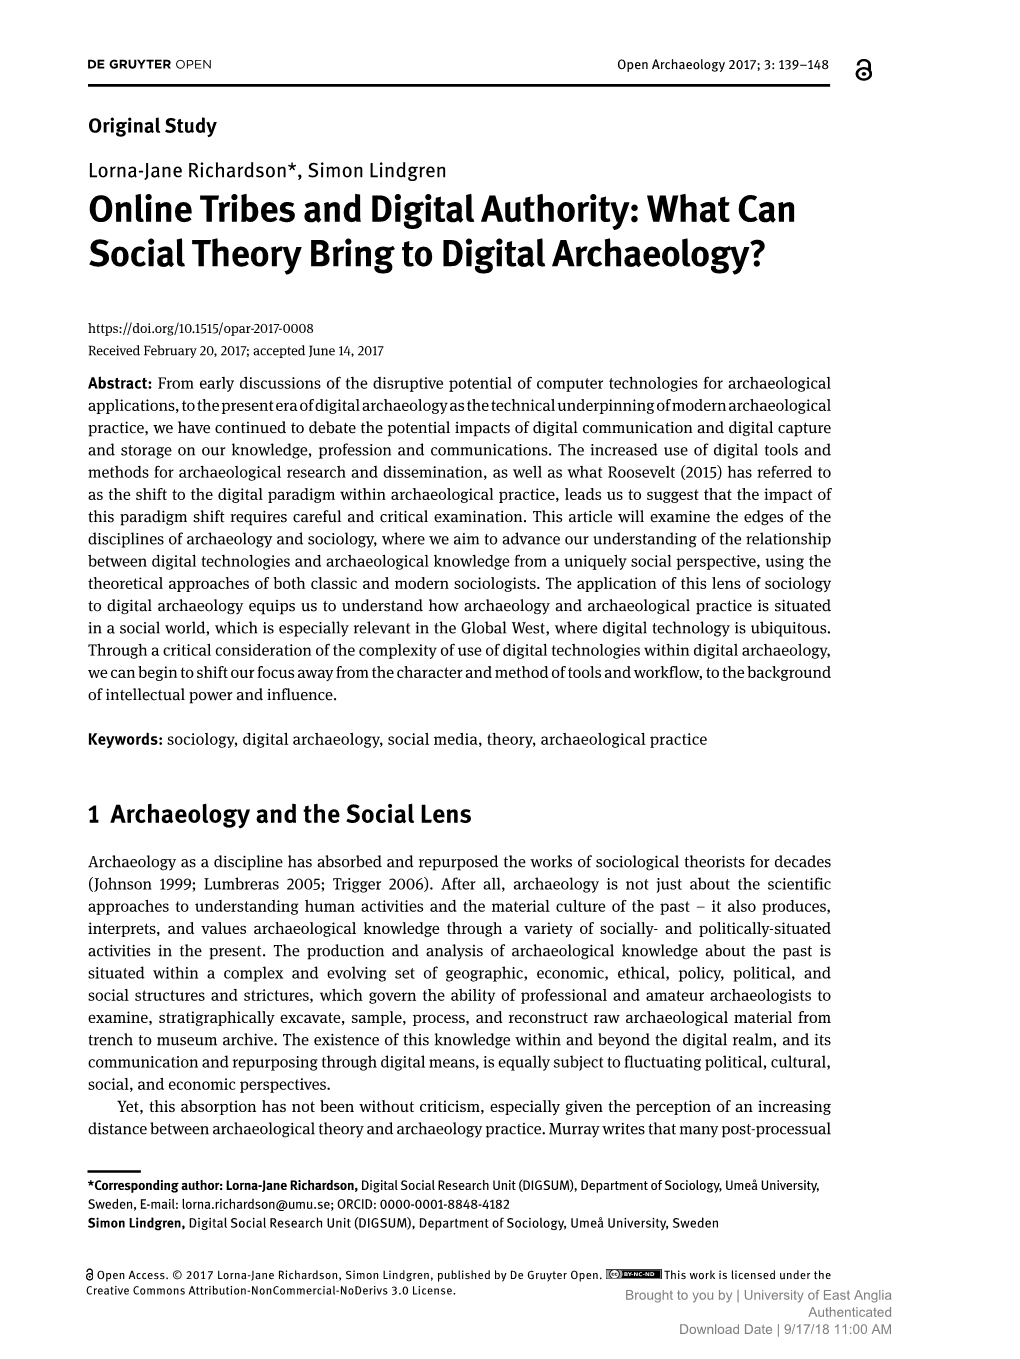 What Can Social Theory Bring to Digital Archaeology?